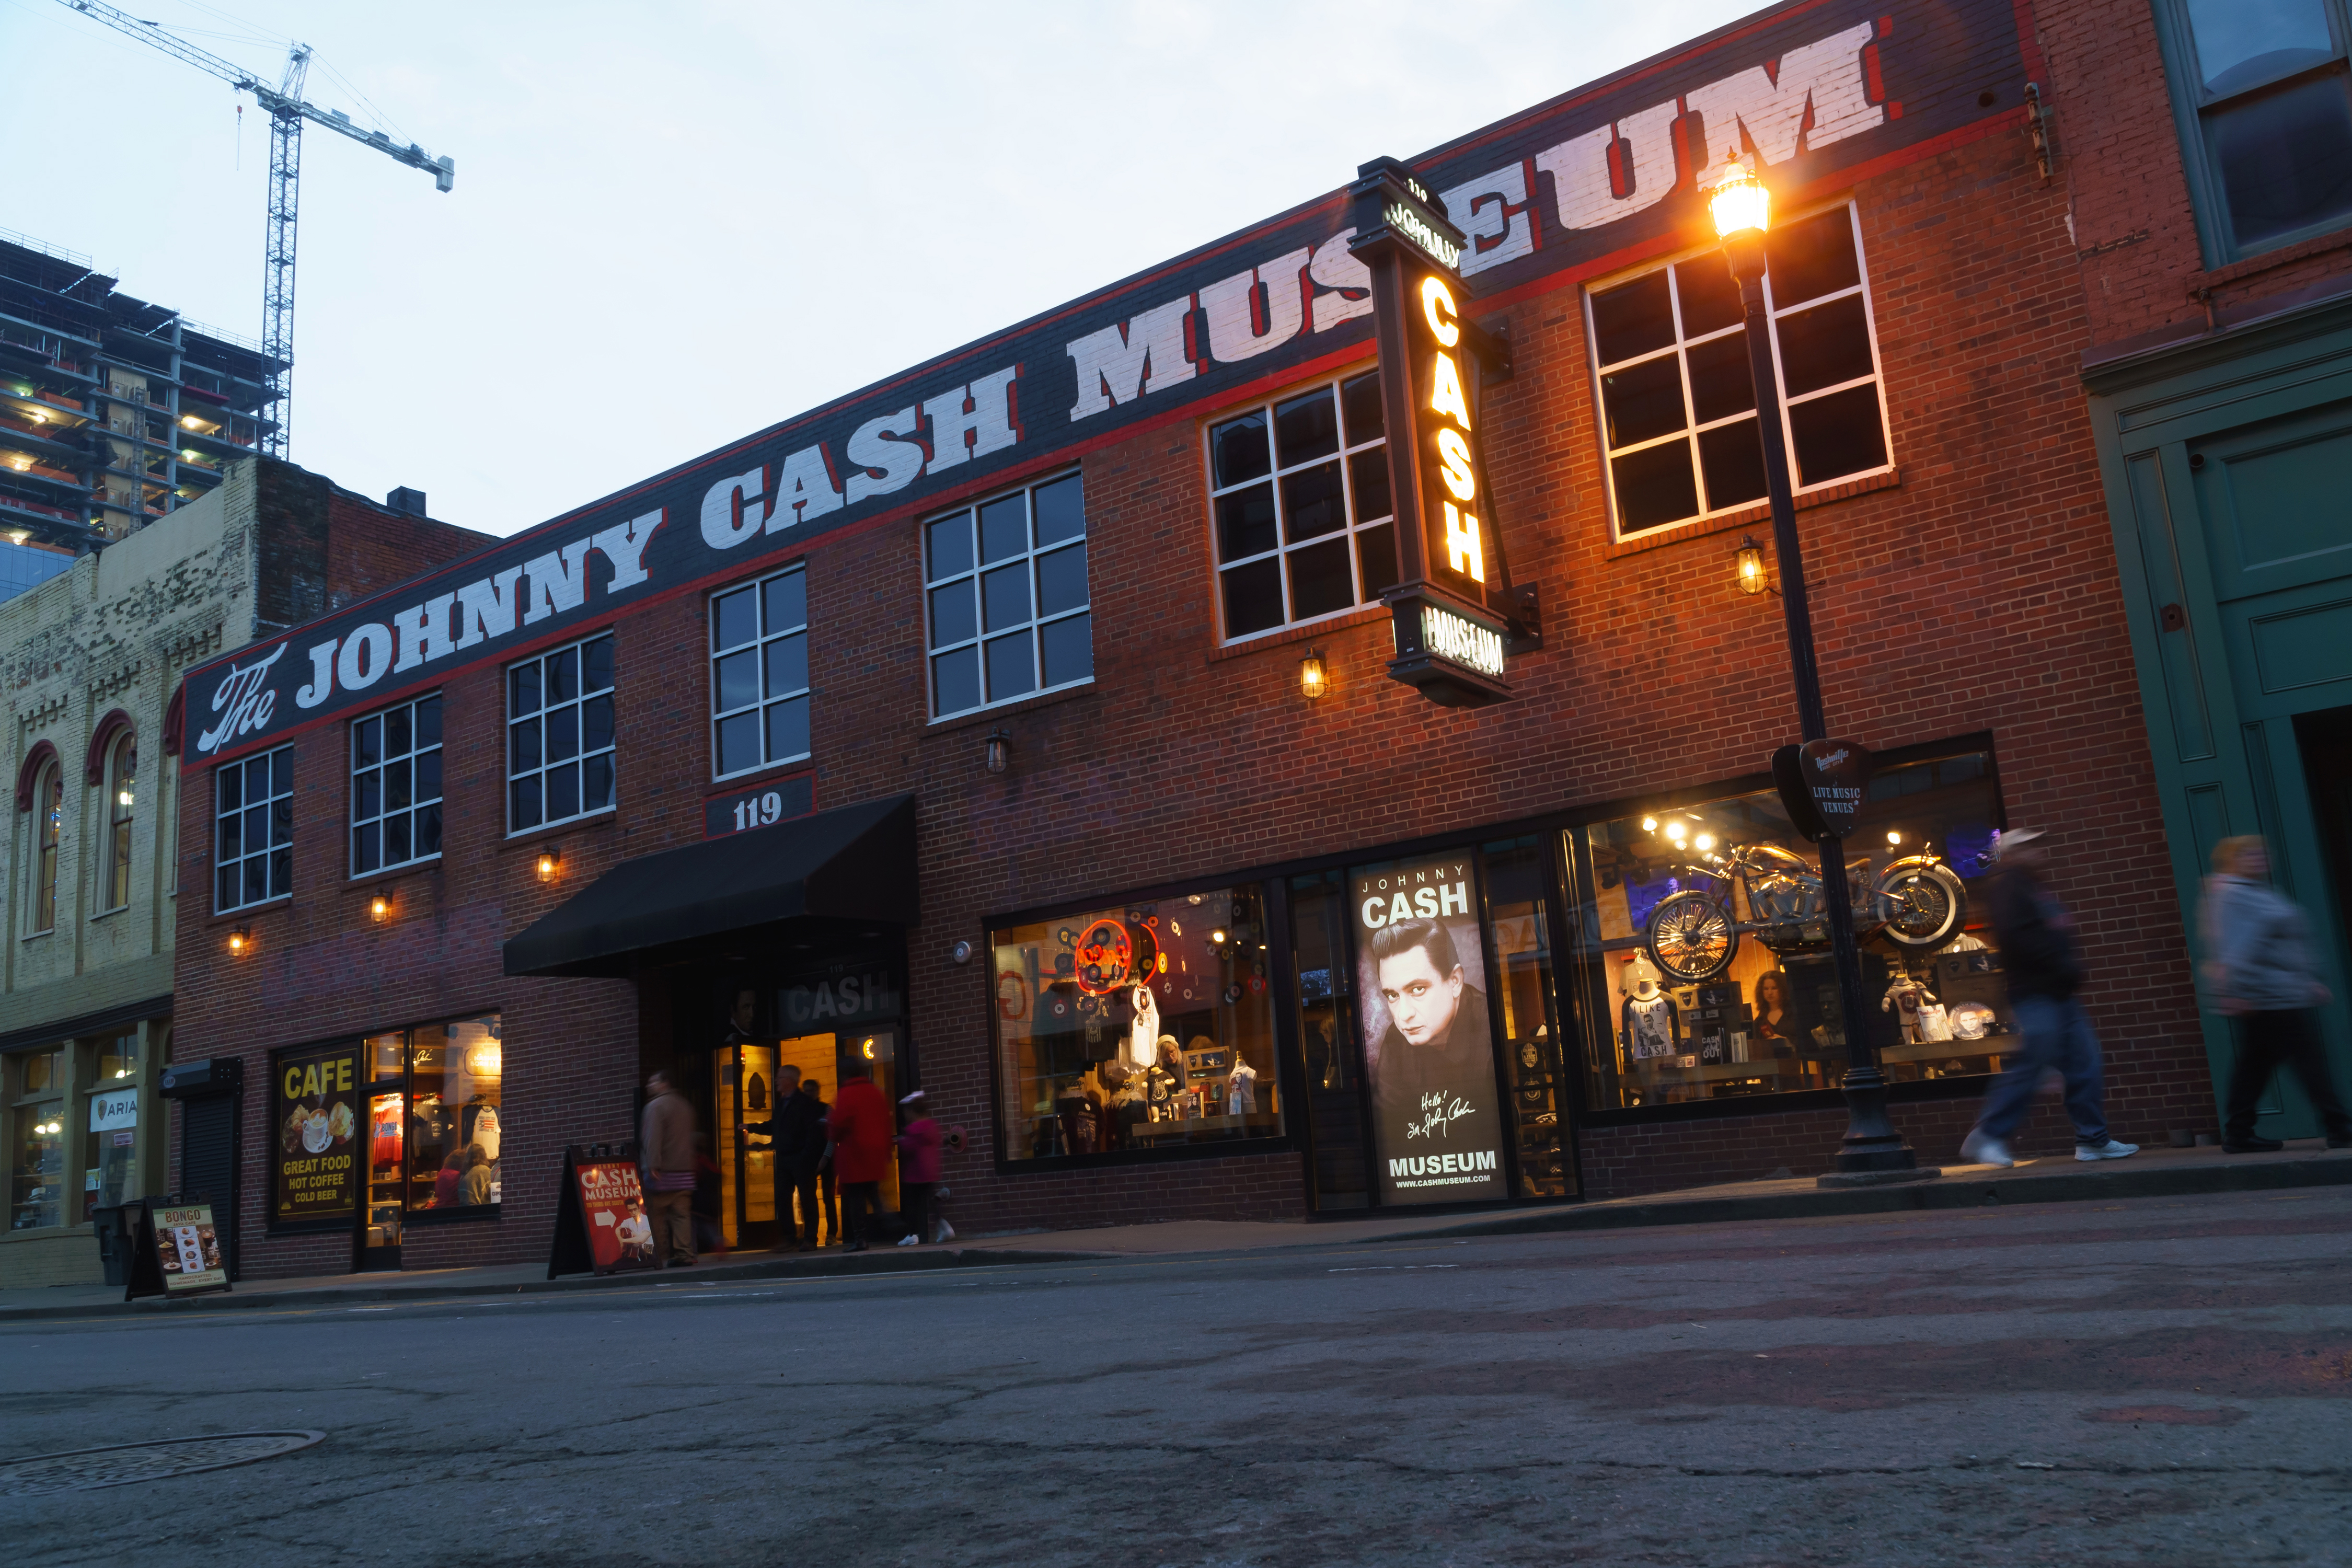 Best Things to Do in Nashville - Johnny Cash Museum